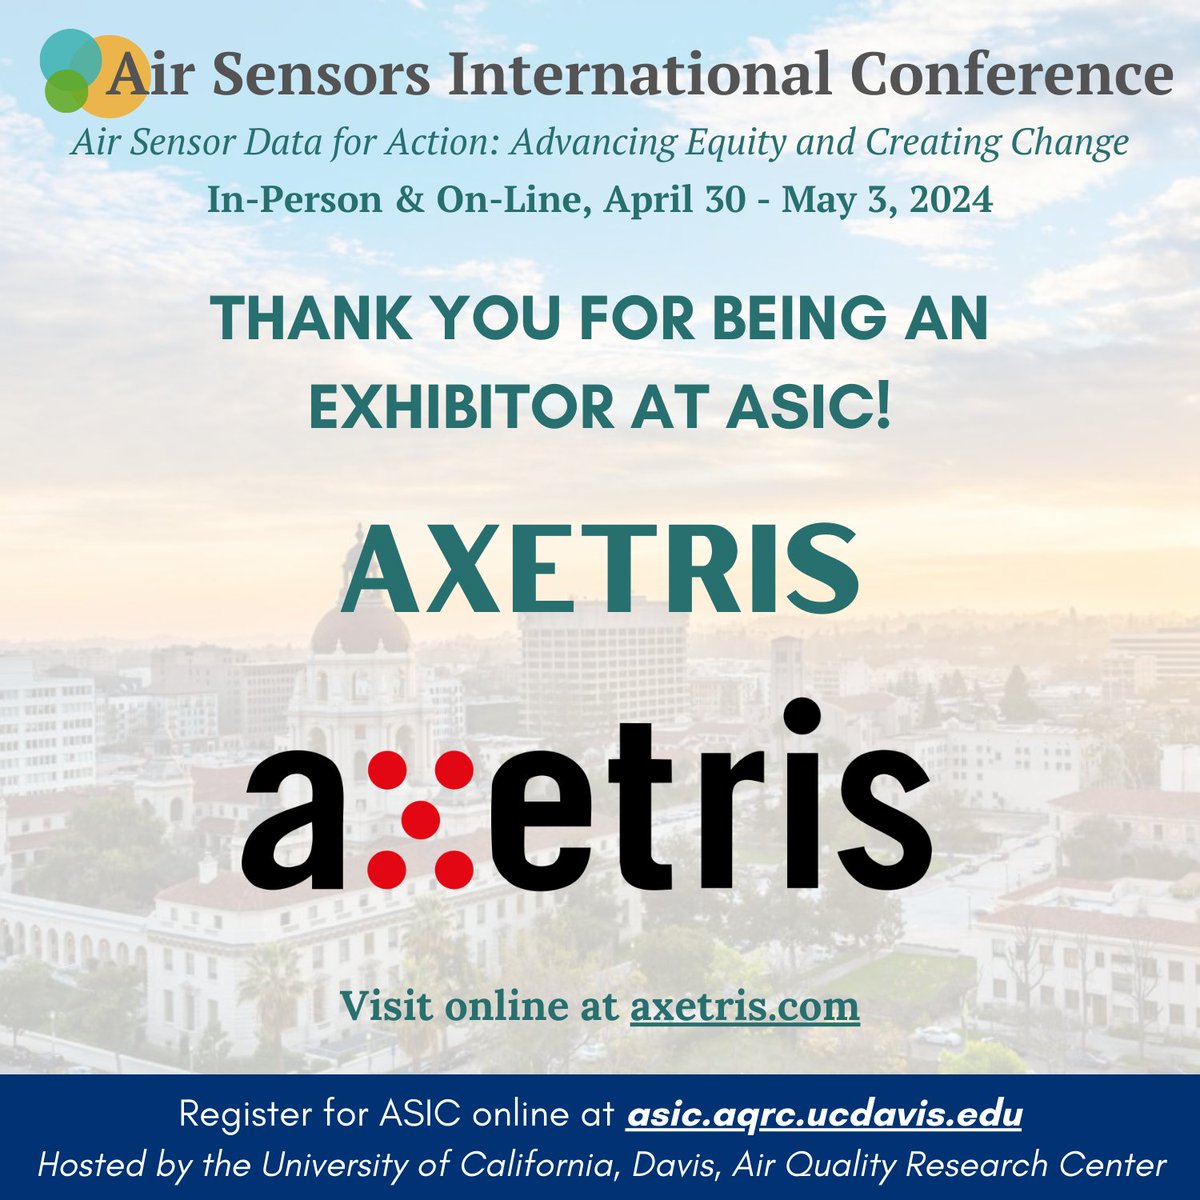 Thank you to Axetris for being an exhibitor as ASIC California 2024! Learn more about them at axetris.com/en. @axetris #airquality #airsensors #airpollution #ASIC2024 #lowcostsensors #communityscience #indoorair